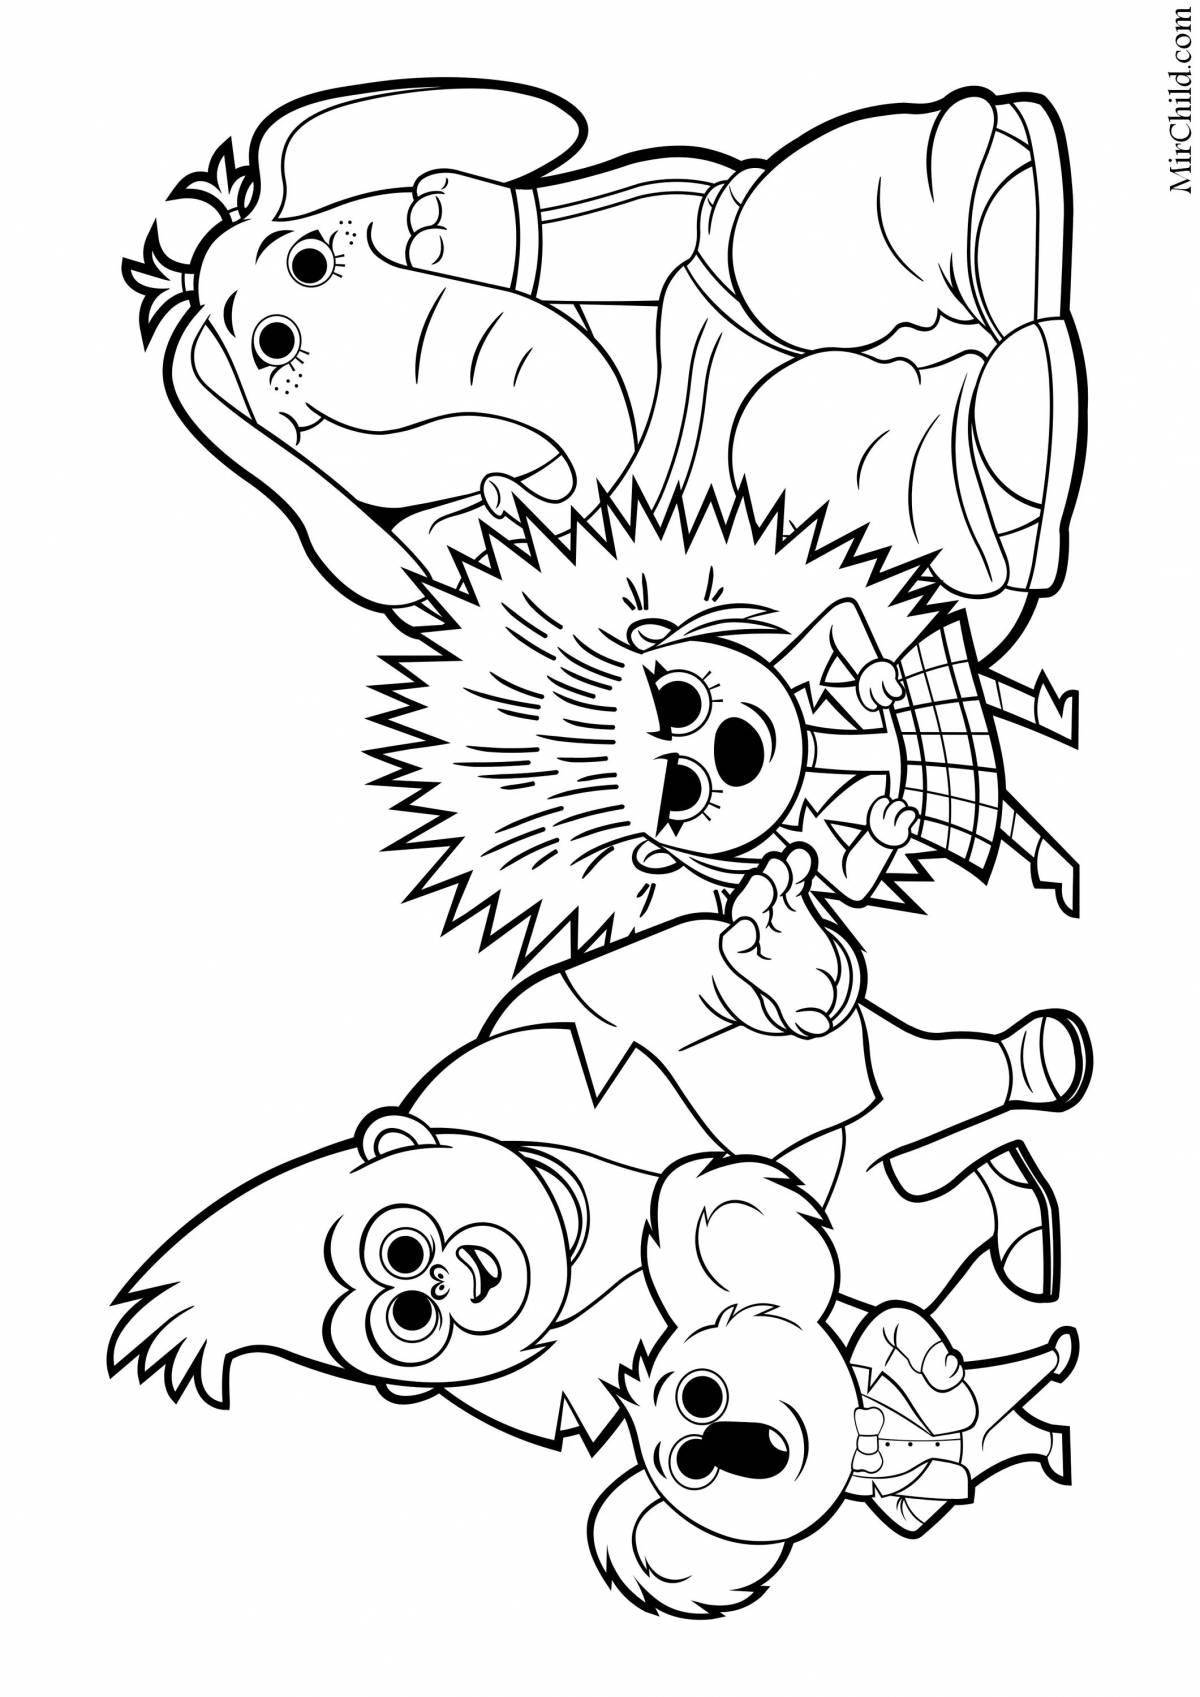 Coloring page nice song 2